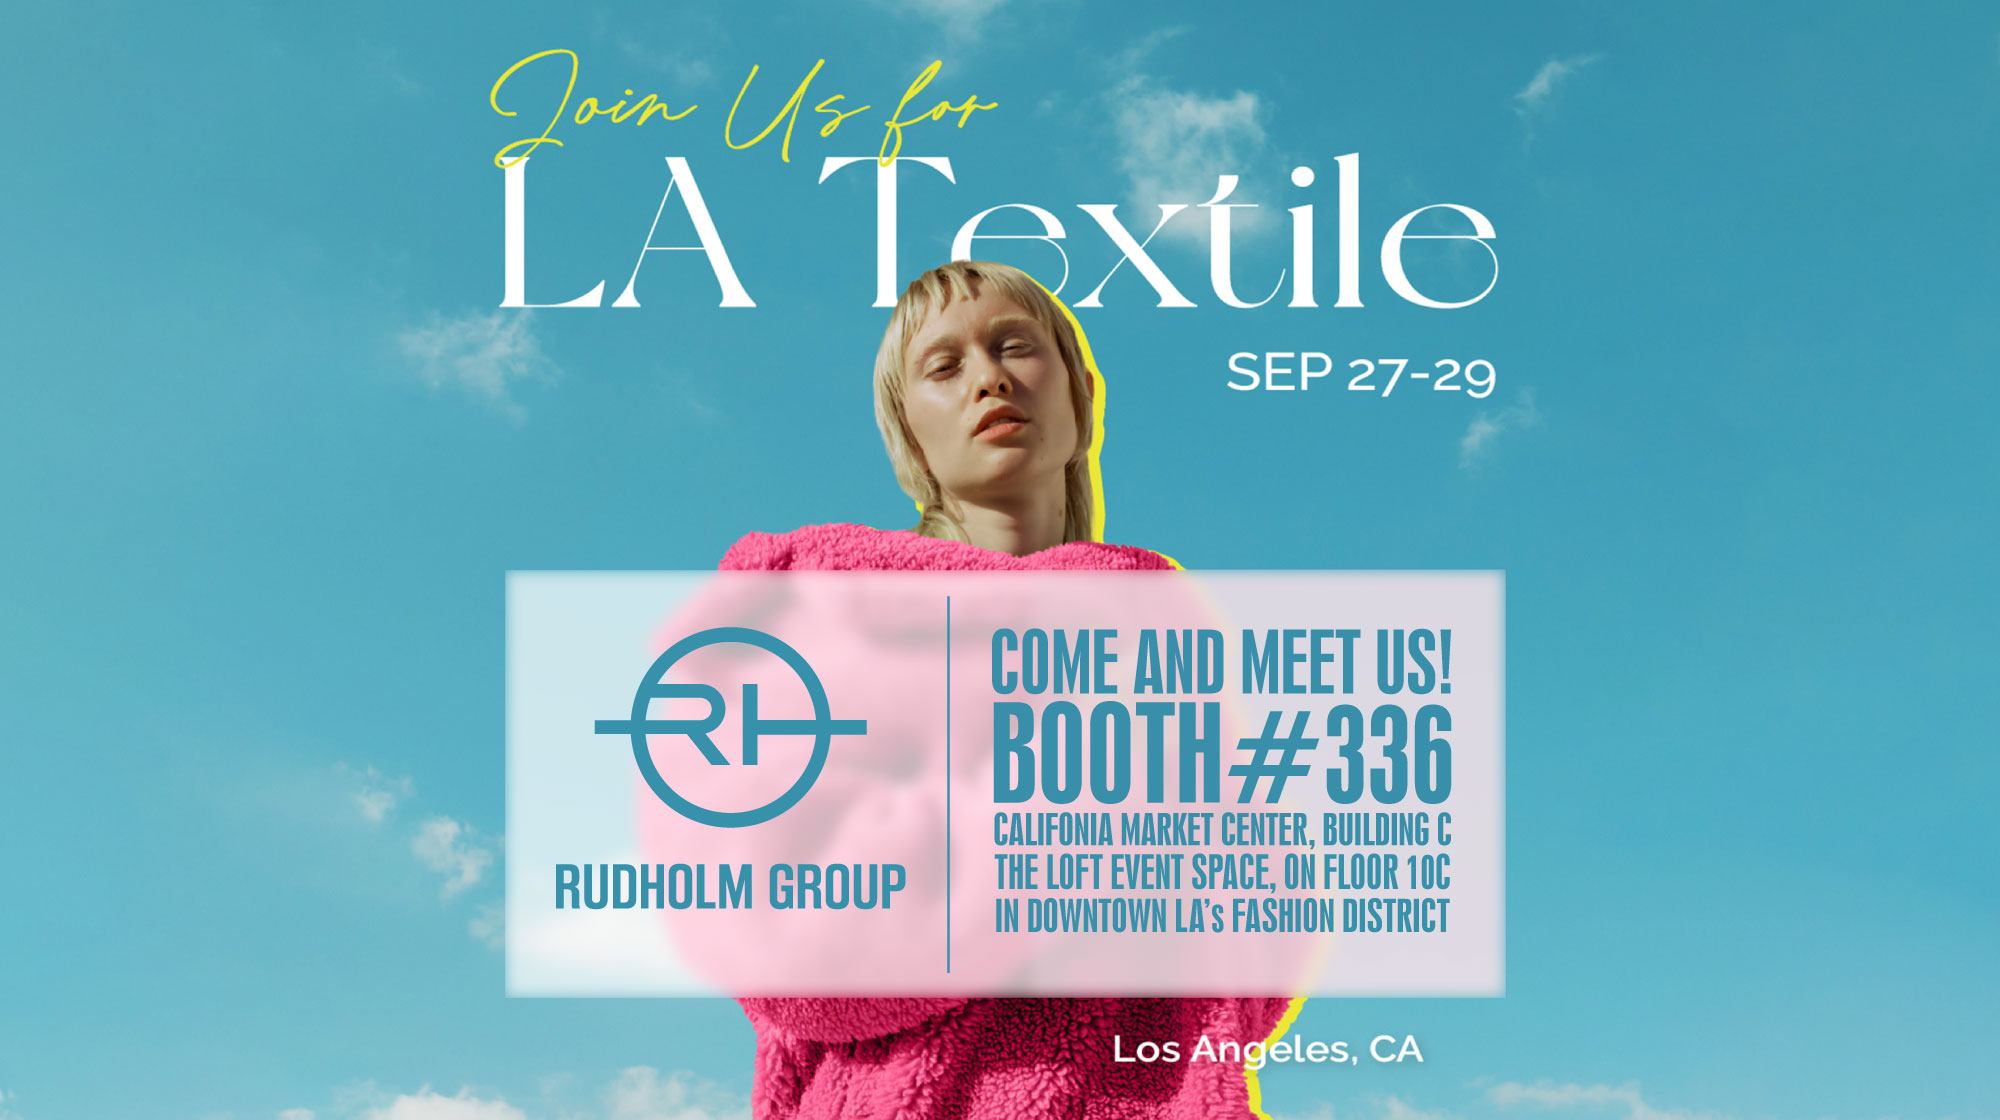 Rudholm Group exhibition at the LA Textile Show from Sept 2729th 2023